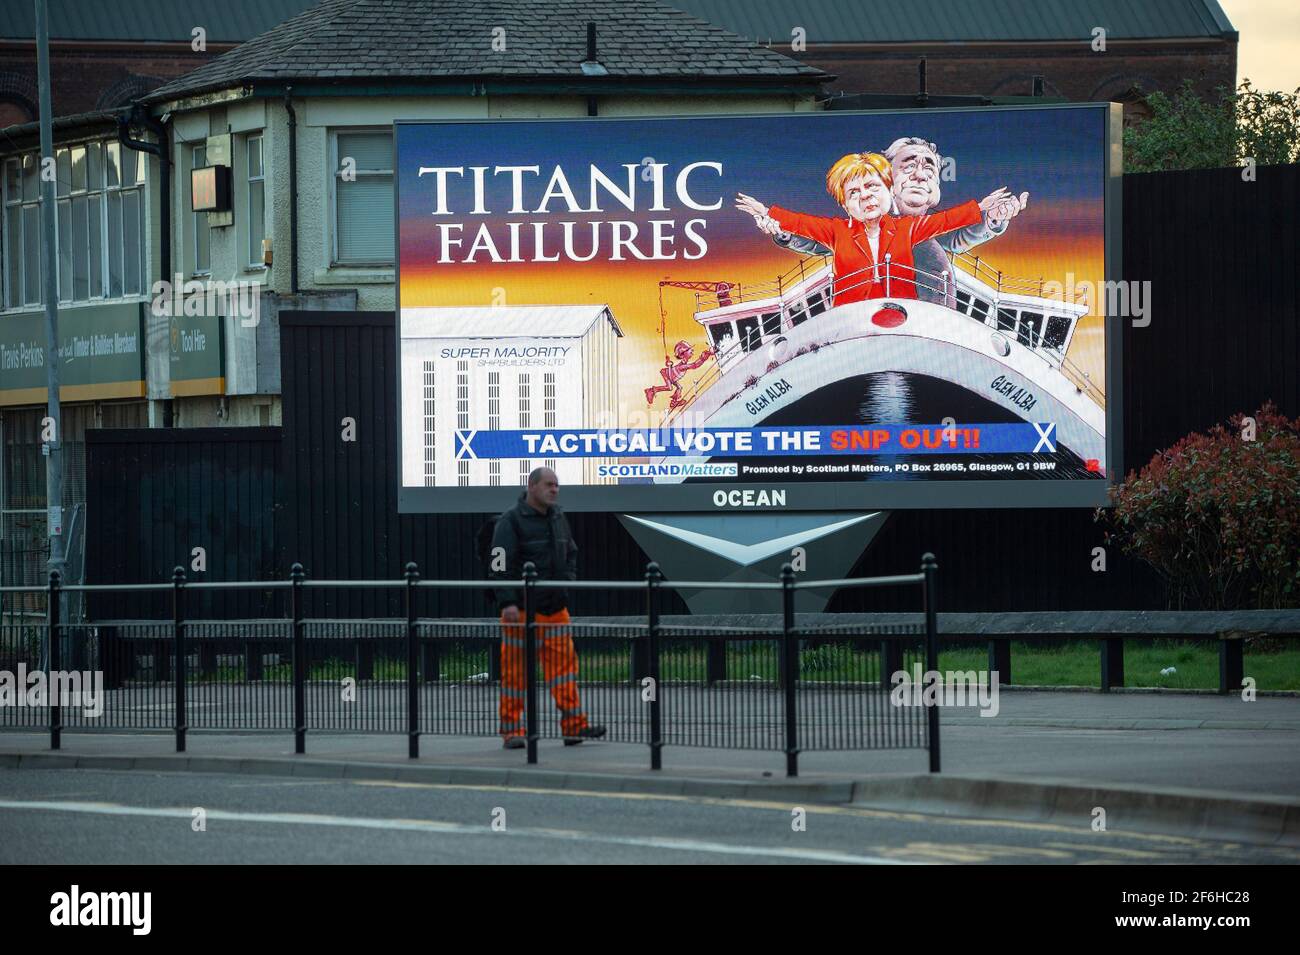 Glasgow, Scotland, UK. 1 April 2021. PICTURED: A giant electronic billboard displaying an artwork graphic with the title, “TITANIC FAILURES” and “TACTICAL VOTEE THE SNP OUT” with cartoon characters of Nicola Sturgeon and Alex Salmond re-enacting the famous scene from the titanic at the bow, but its on the Glen Alba ferry instead.  Press release link: https://www.scotlandmatters.co.uk/titanicfailurebillboard/  Article Link: https://www.bbc.co.uk/news/amp/uk-scotland-glasgow-west-56579158?__twitter_impression=true&s=03  Credit: Colin Fisher/Alamy Live News. Stock Photo